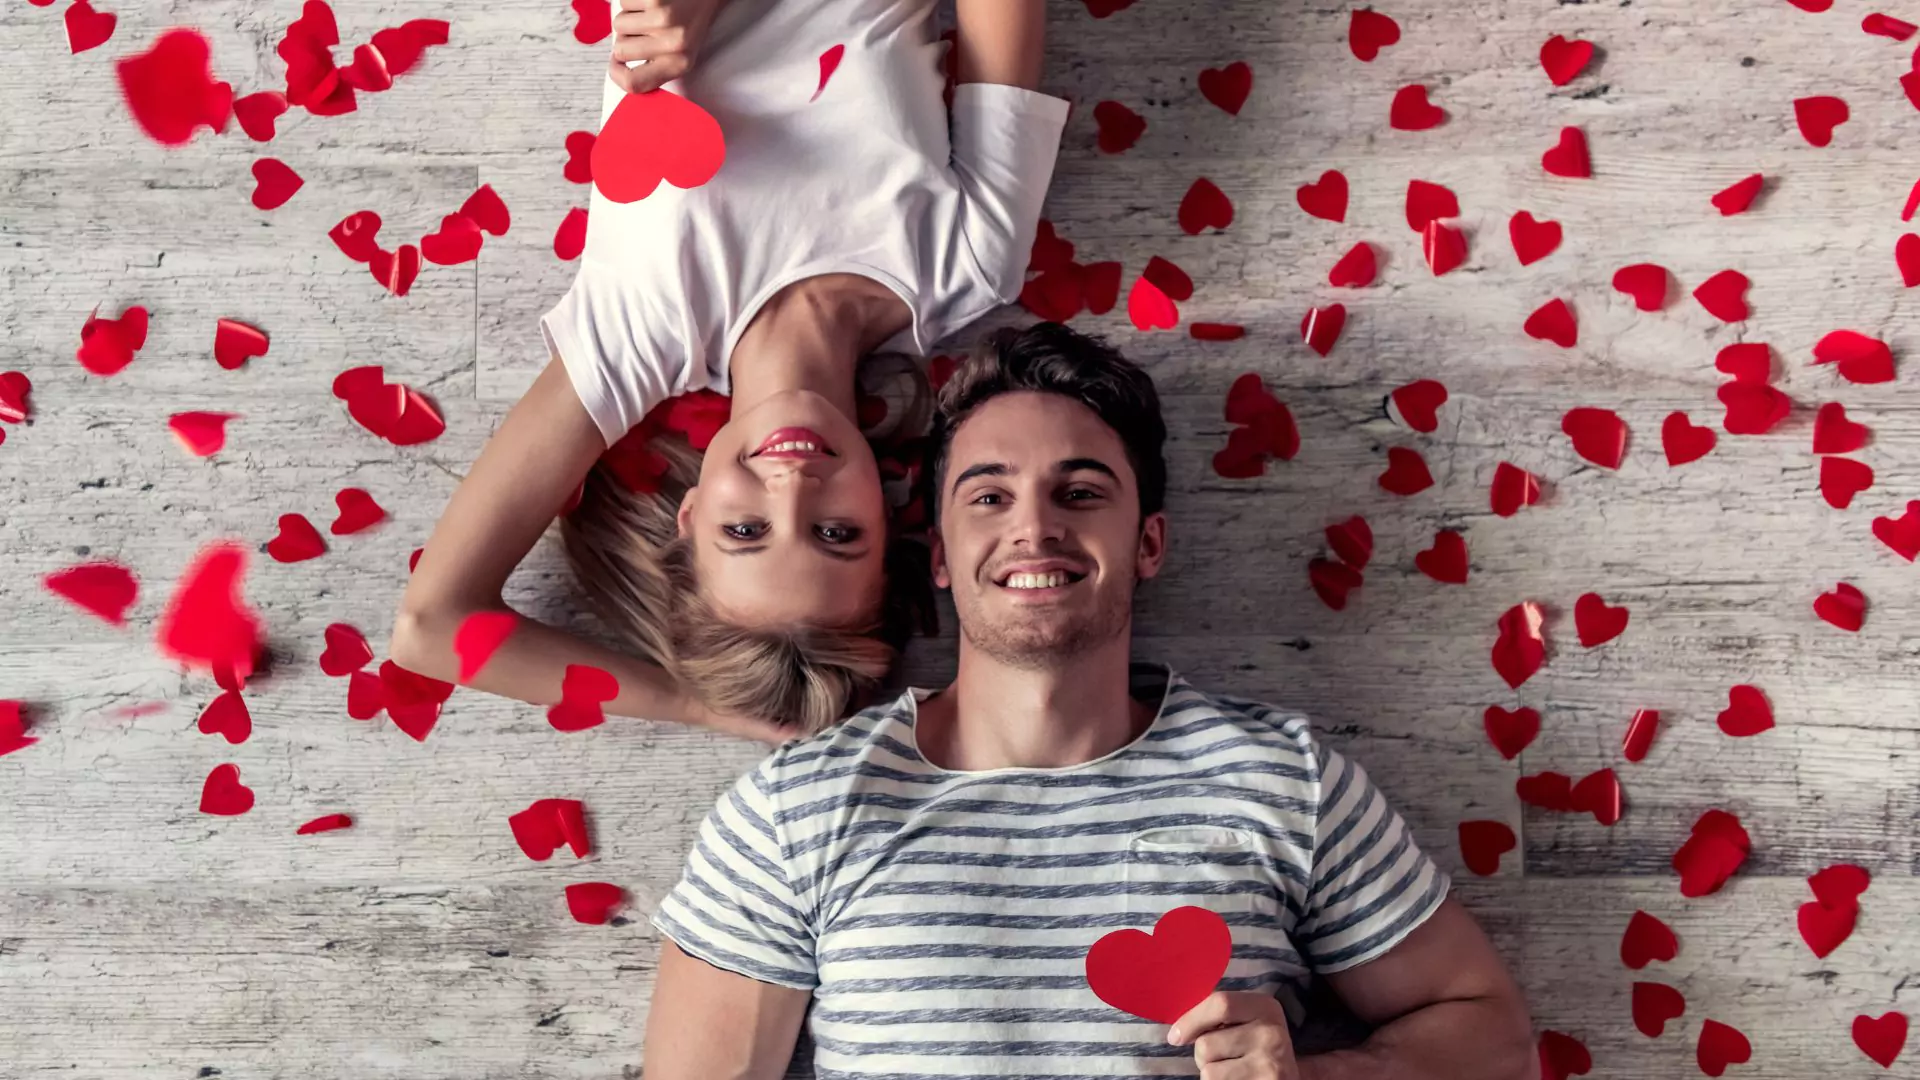 How to boost intimacy in your relationship, according to experts